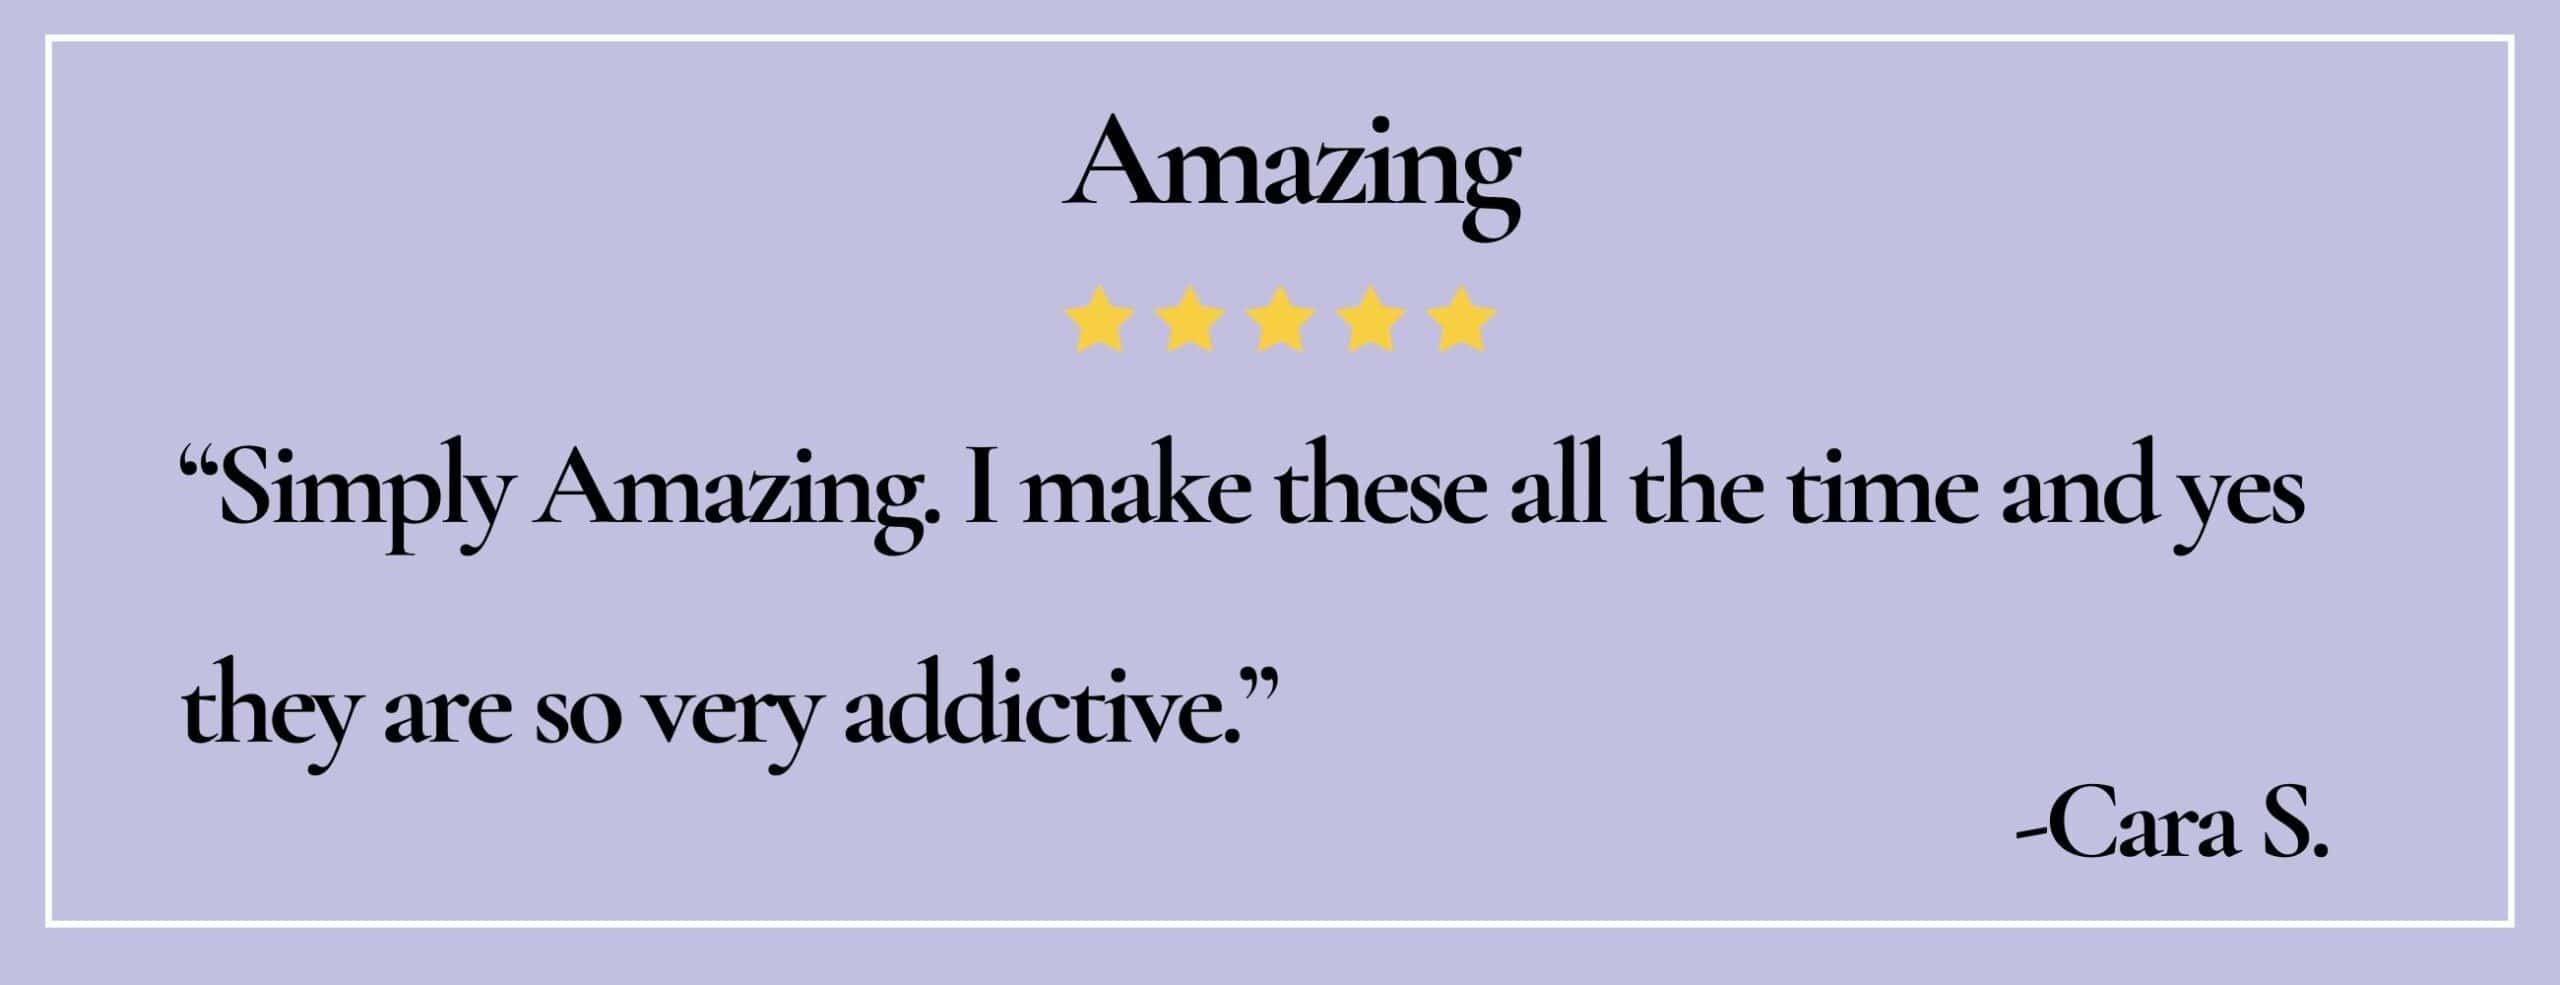 text box with quote:Amazing "Simply Amazing.I make these all the time and yes they are so very addictive."-Cara S.